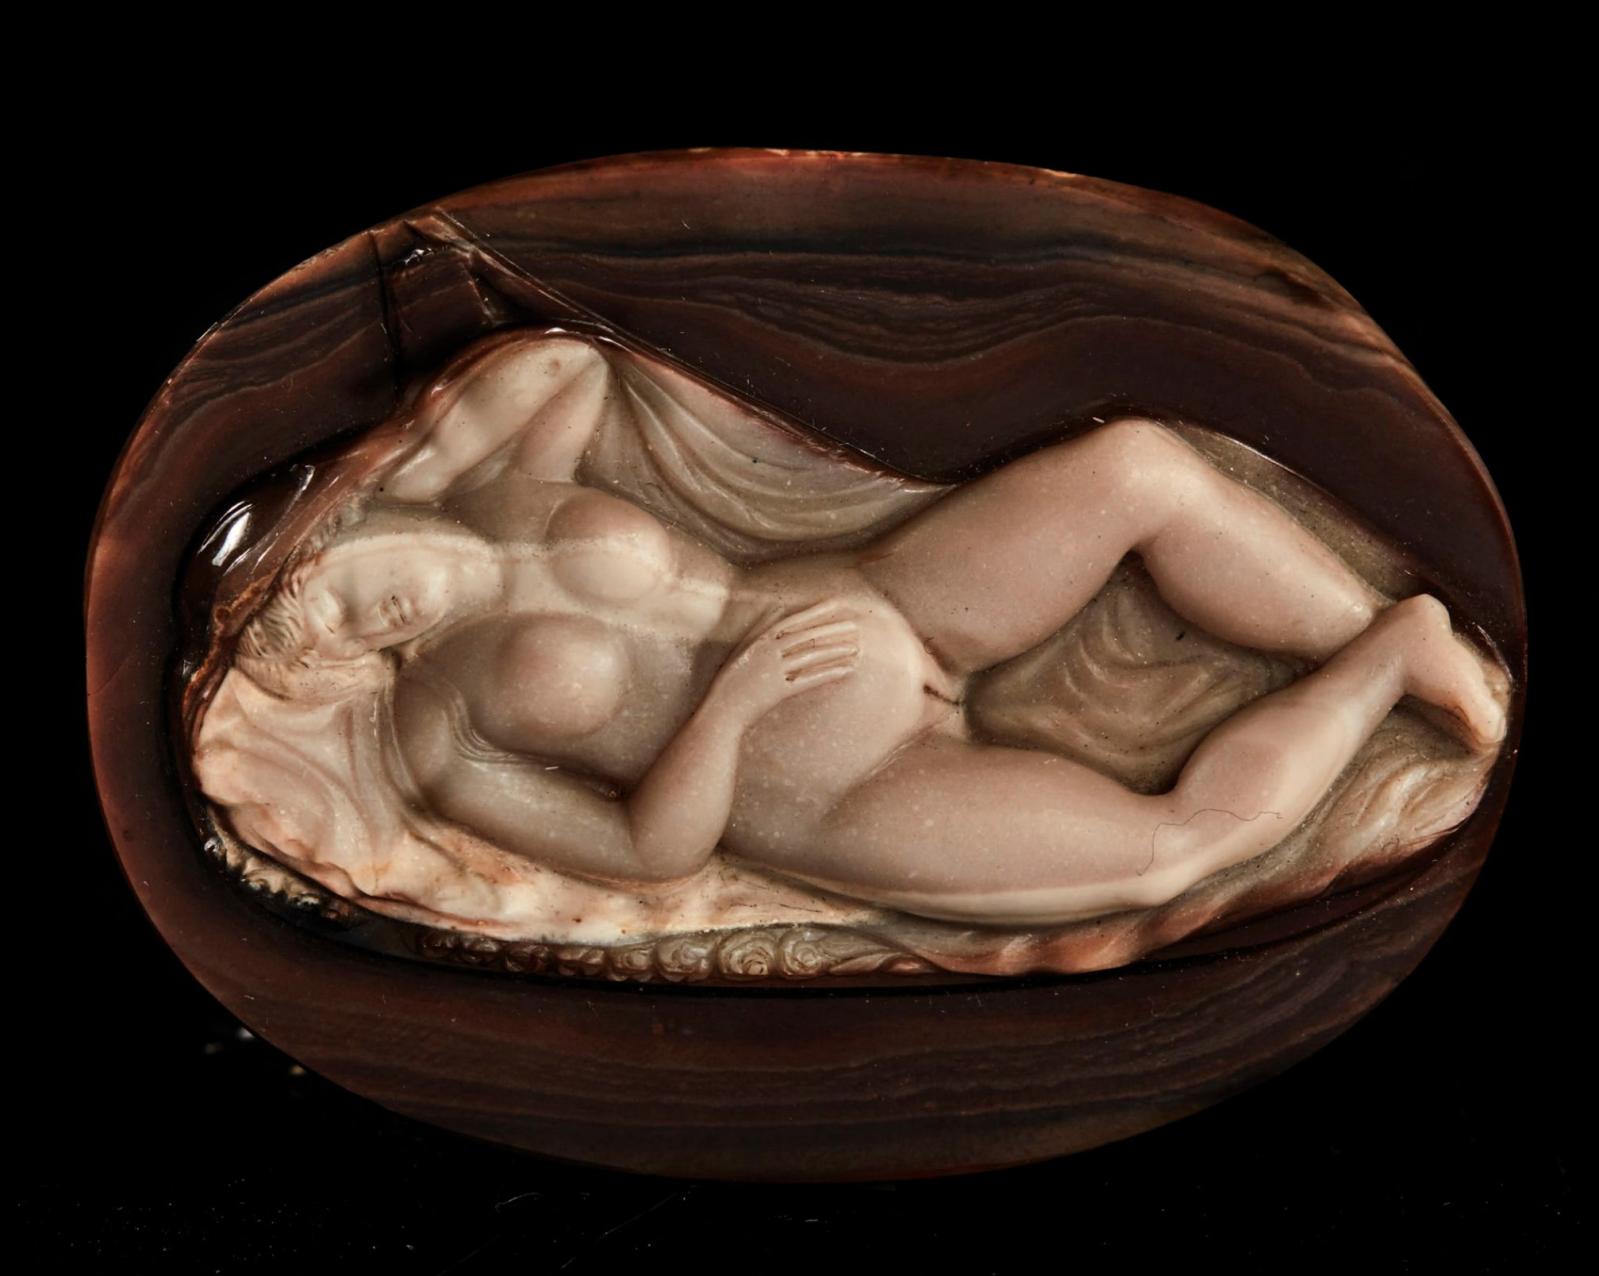 Prague, attributed to Ottavio Miseroni (1567-1624), c. 1600, double-layered oval agate cameo depicting a sleeping nymph lying on drapery, 